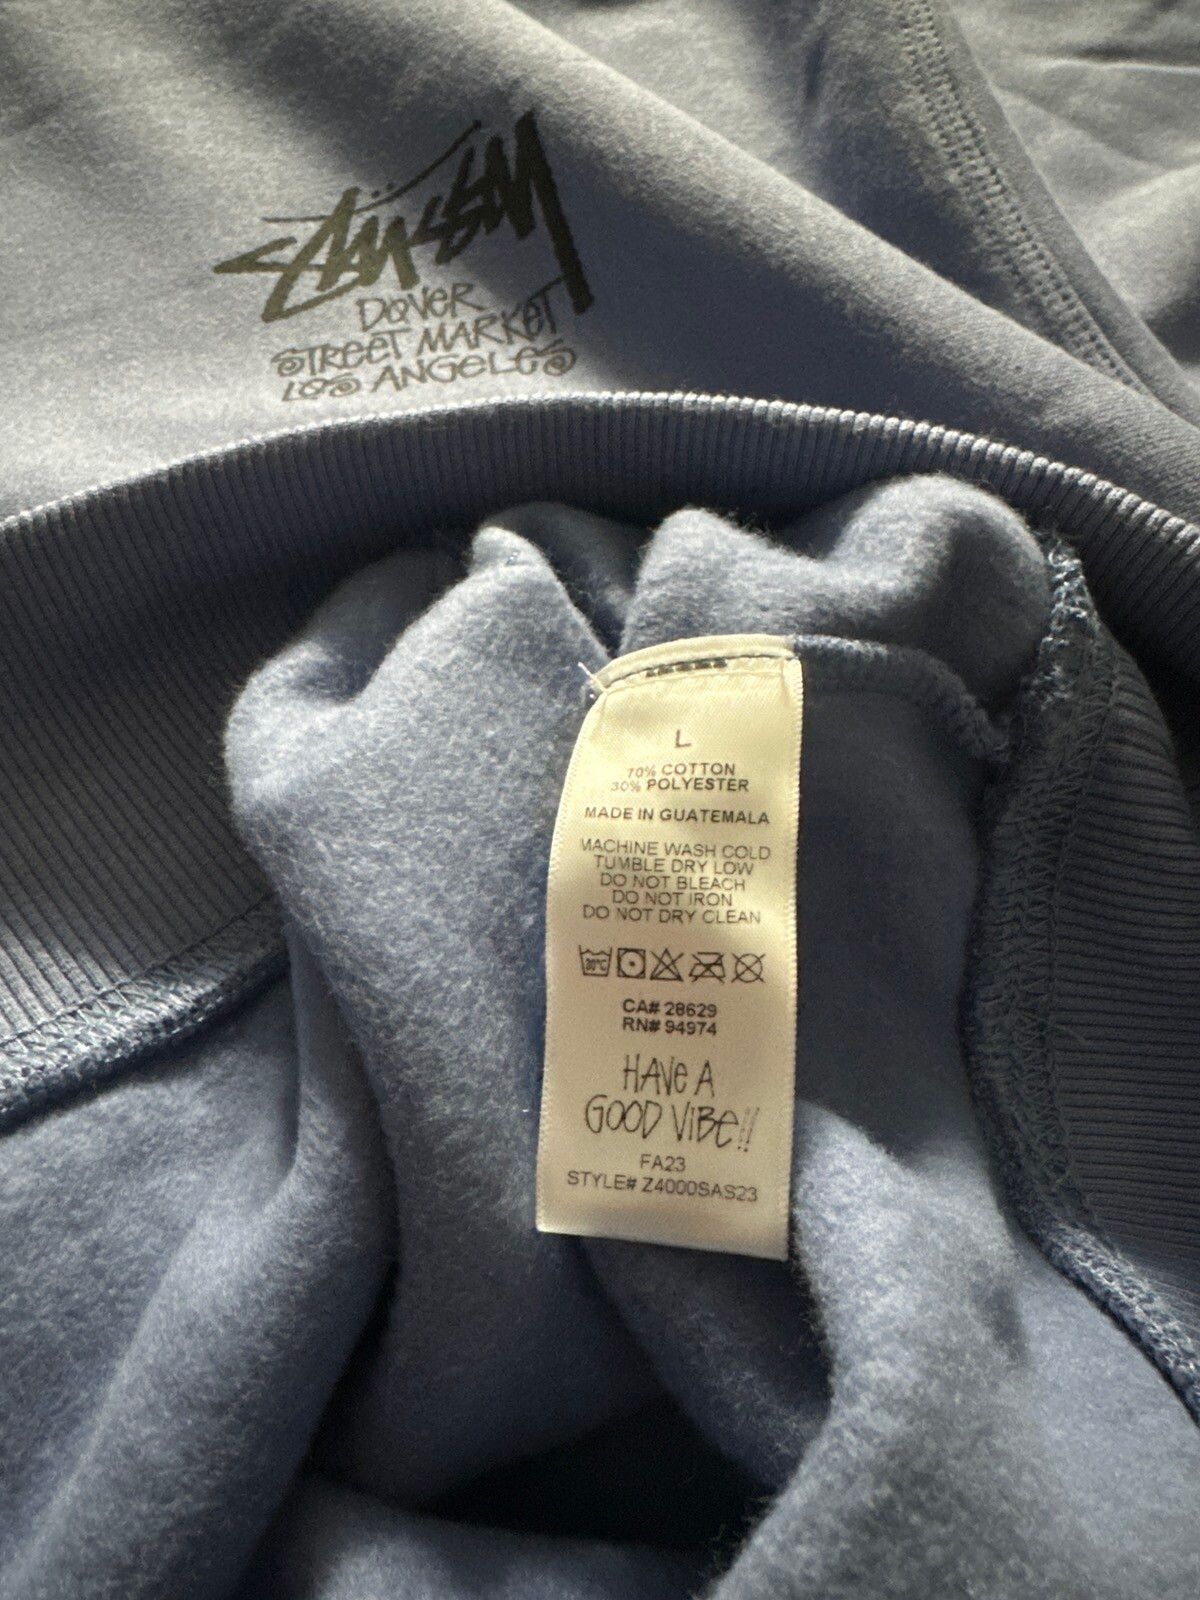 Stussy Blue Stussy Dover Street Market Los Angeles Hoodie Size US L / EU 52-54 / 3 - 6 Preview